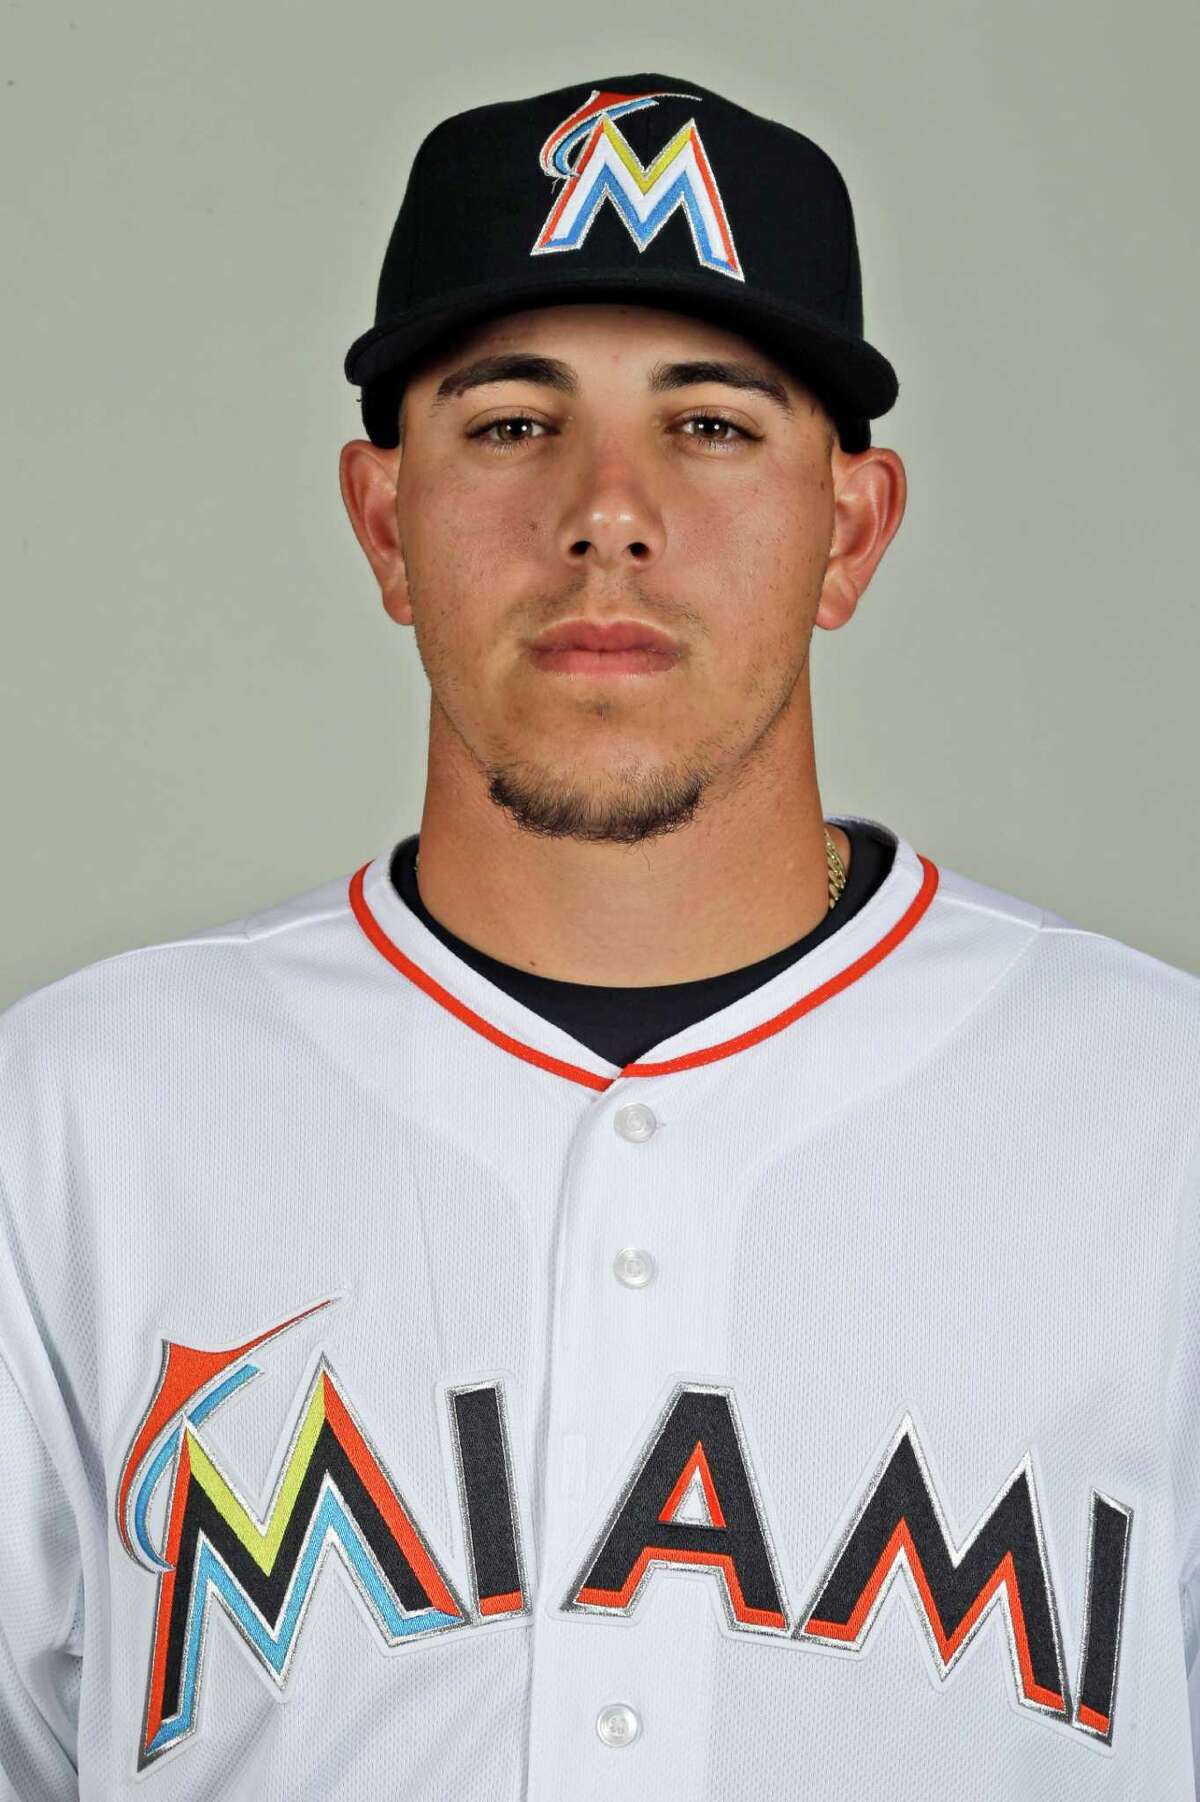 FILE - This is a 2013 file photo showing Jose Fernandez of the Miami Marlins baseball team. Jose Fernandez of the Miami Marlins and Wil Myers of the Tampa Bay Rays have been selected baseball's Rookies of the Year. Fernandez stood out in a deep National League class, and the pitcher received 26 of 30 first-place votes from a Baseball Writers' Association of America panel in results revealed Monday, Nov. 11, 2013. (AP Photo/Julio Cortez, File)